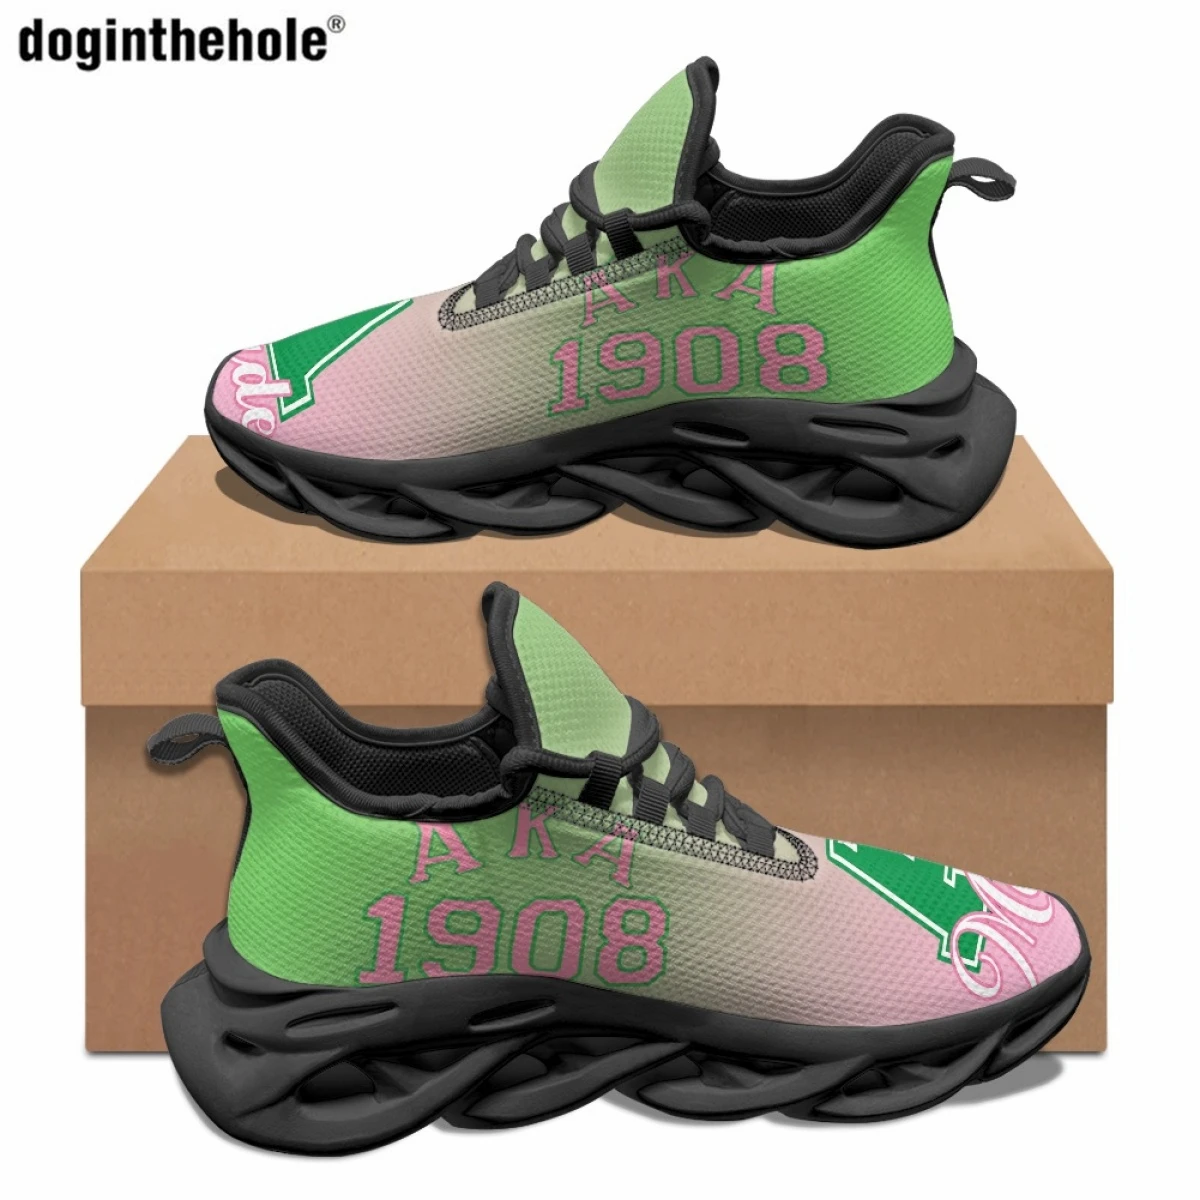 

Doginthehole Alpha Kappa Alpha Sorority Design Casual Sneakers for Ladies Fashion Summer Outdoor Running Shoes Classic Lace Up